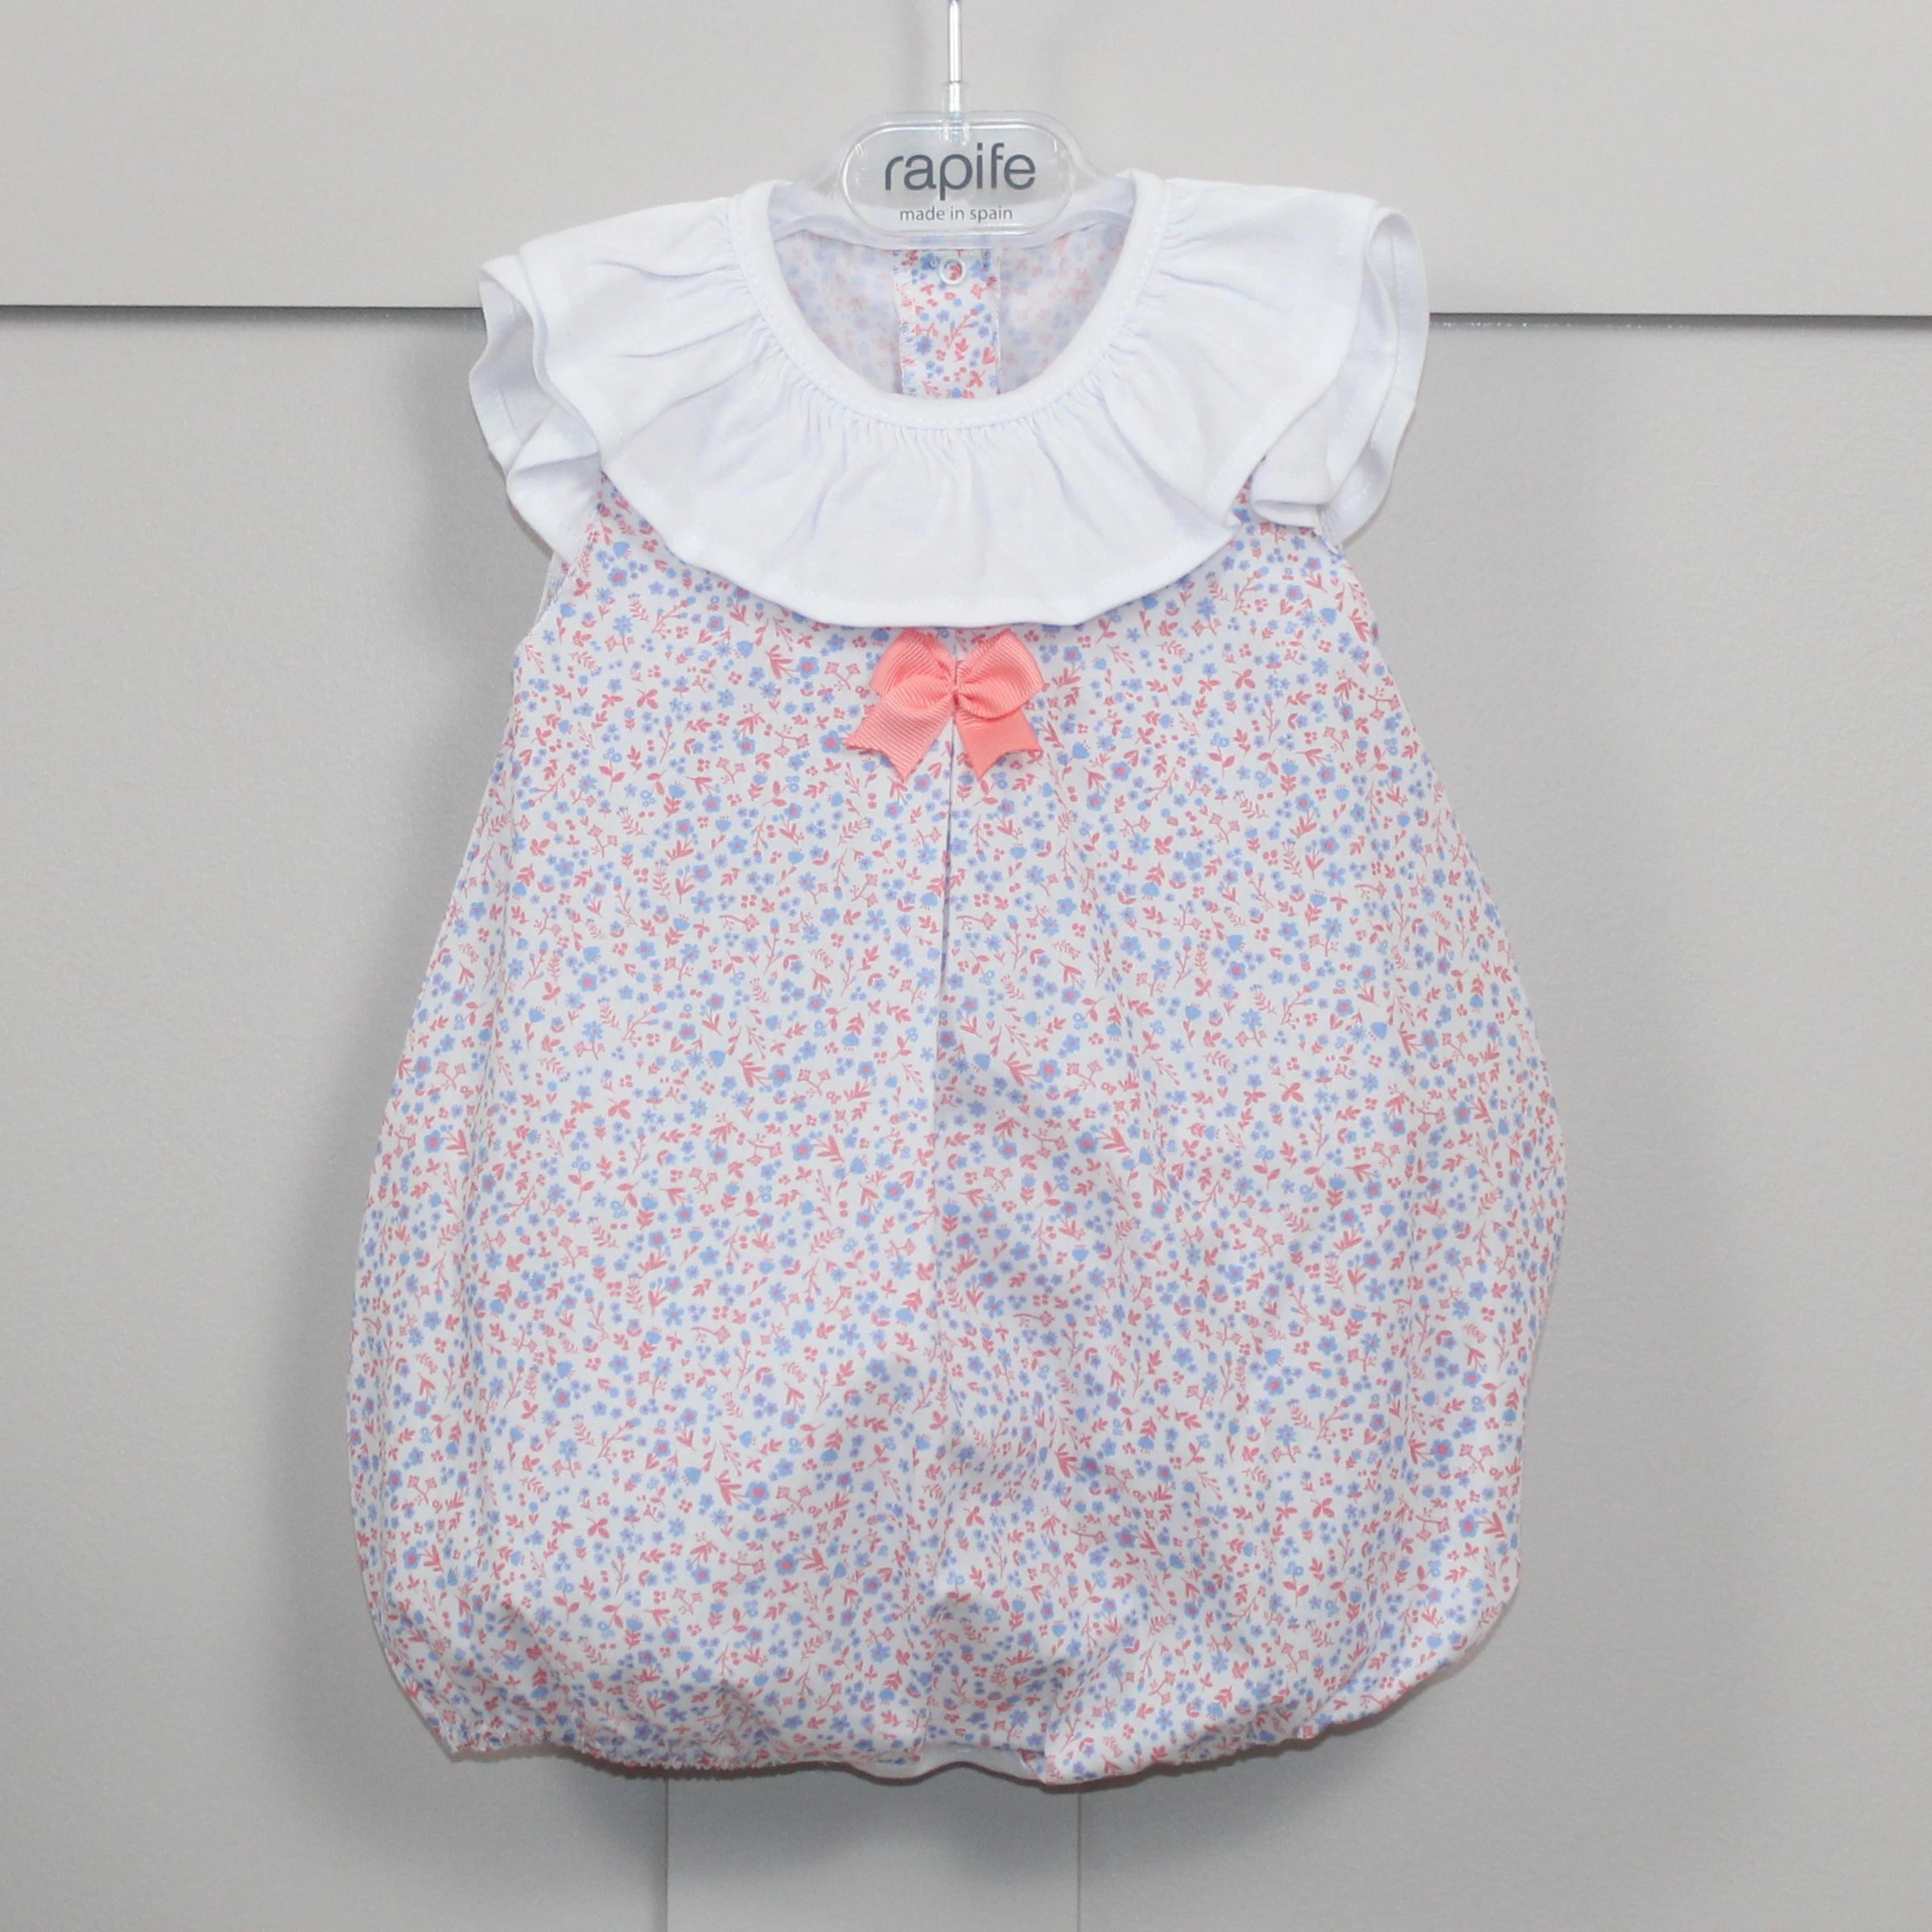 rapife Florence Baby Romper